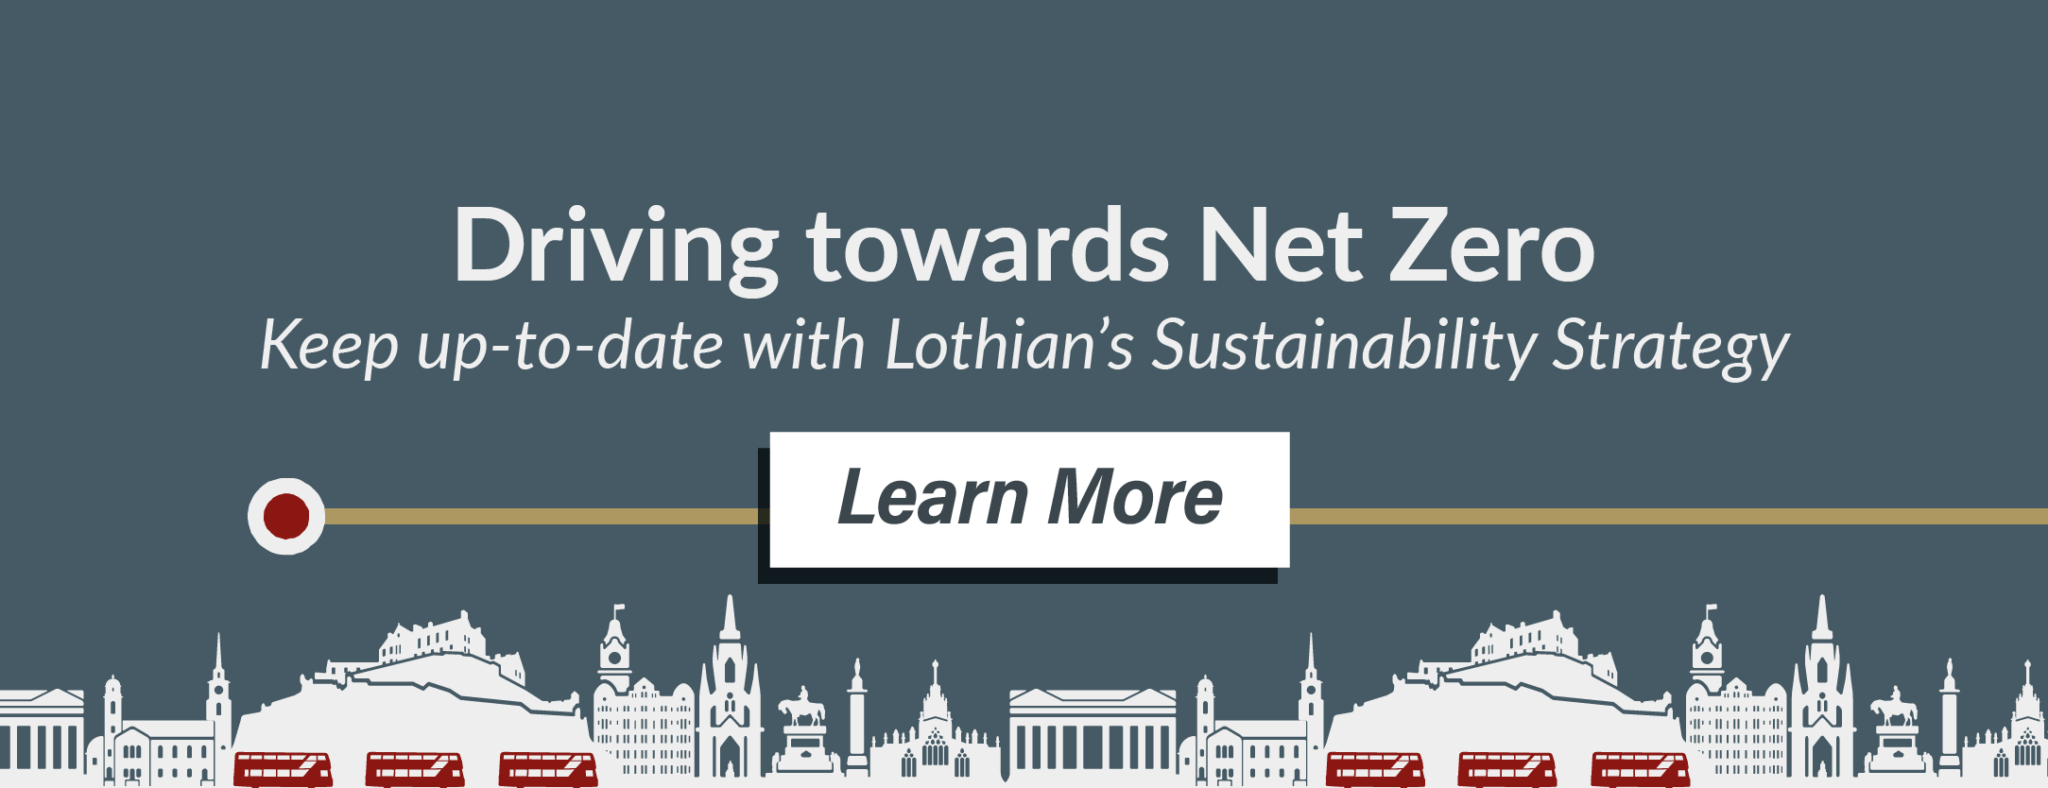 Driving towards Net Zero. Keep up-to-date with Lothian's Sustainability Strategy. Learn more.